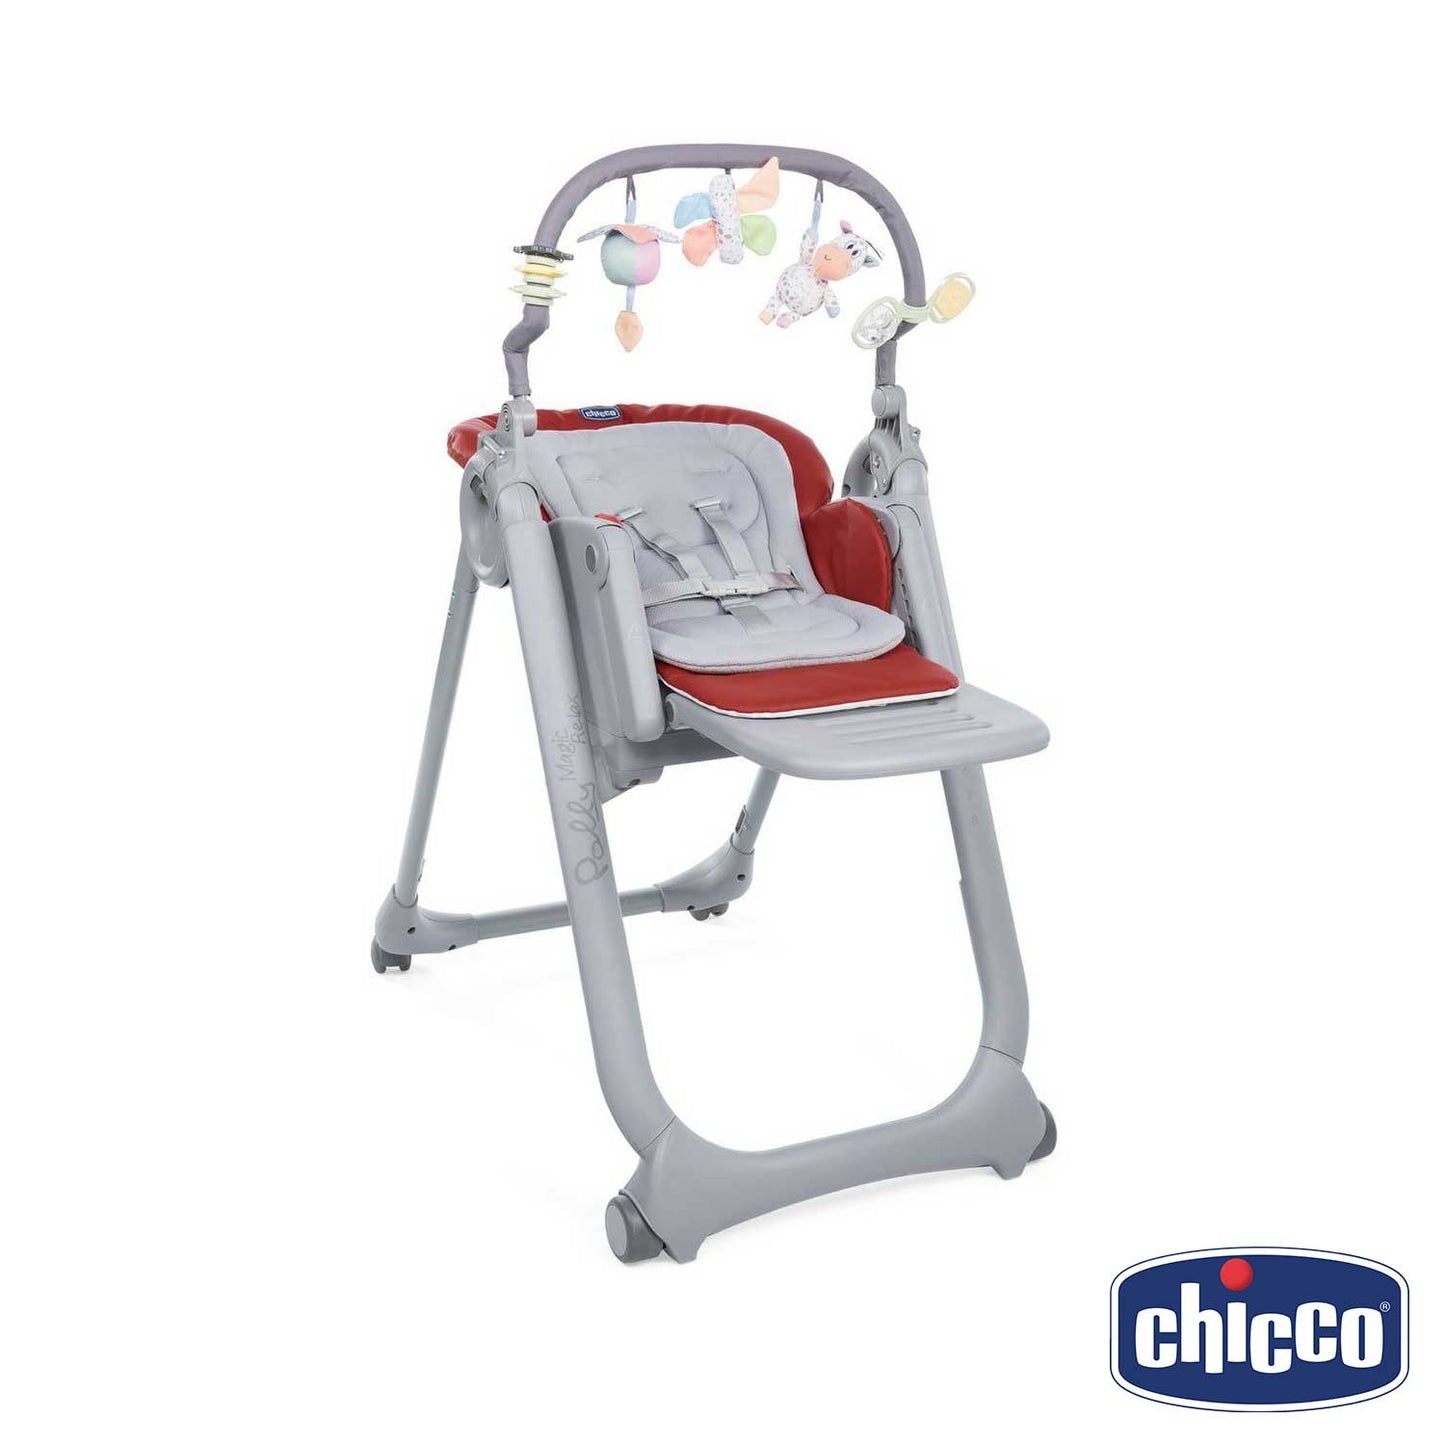 Chicco - Polly Magic Relax Highchair - 4 wheels